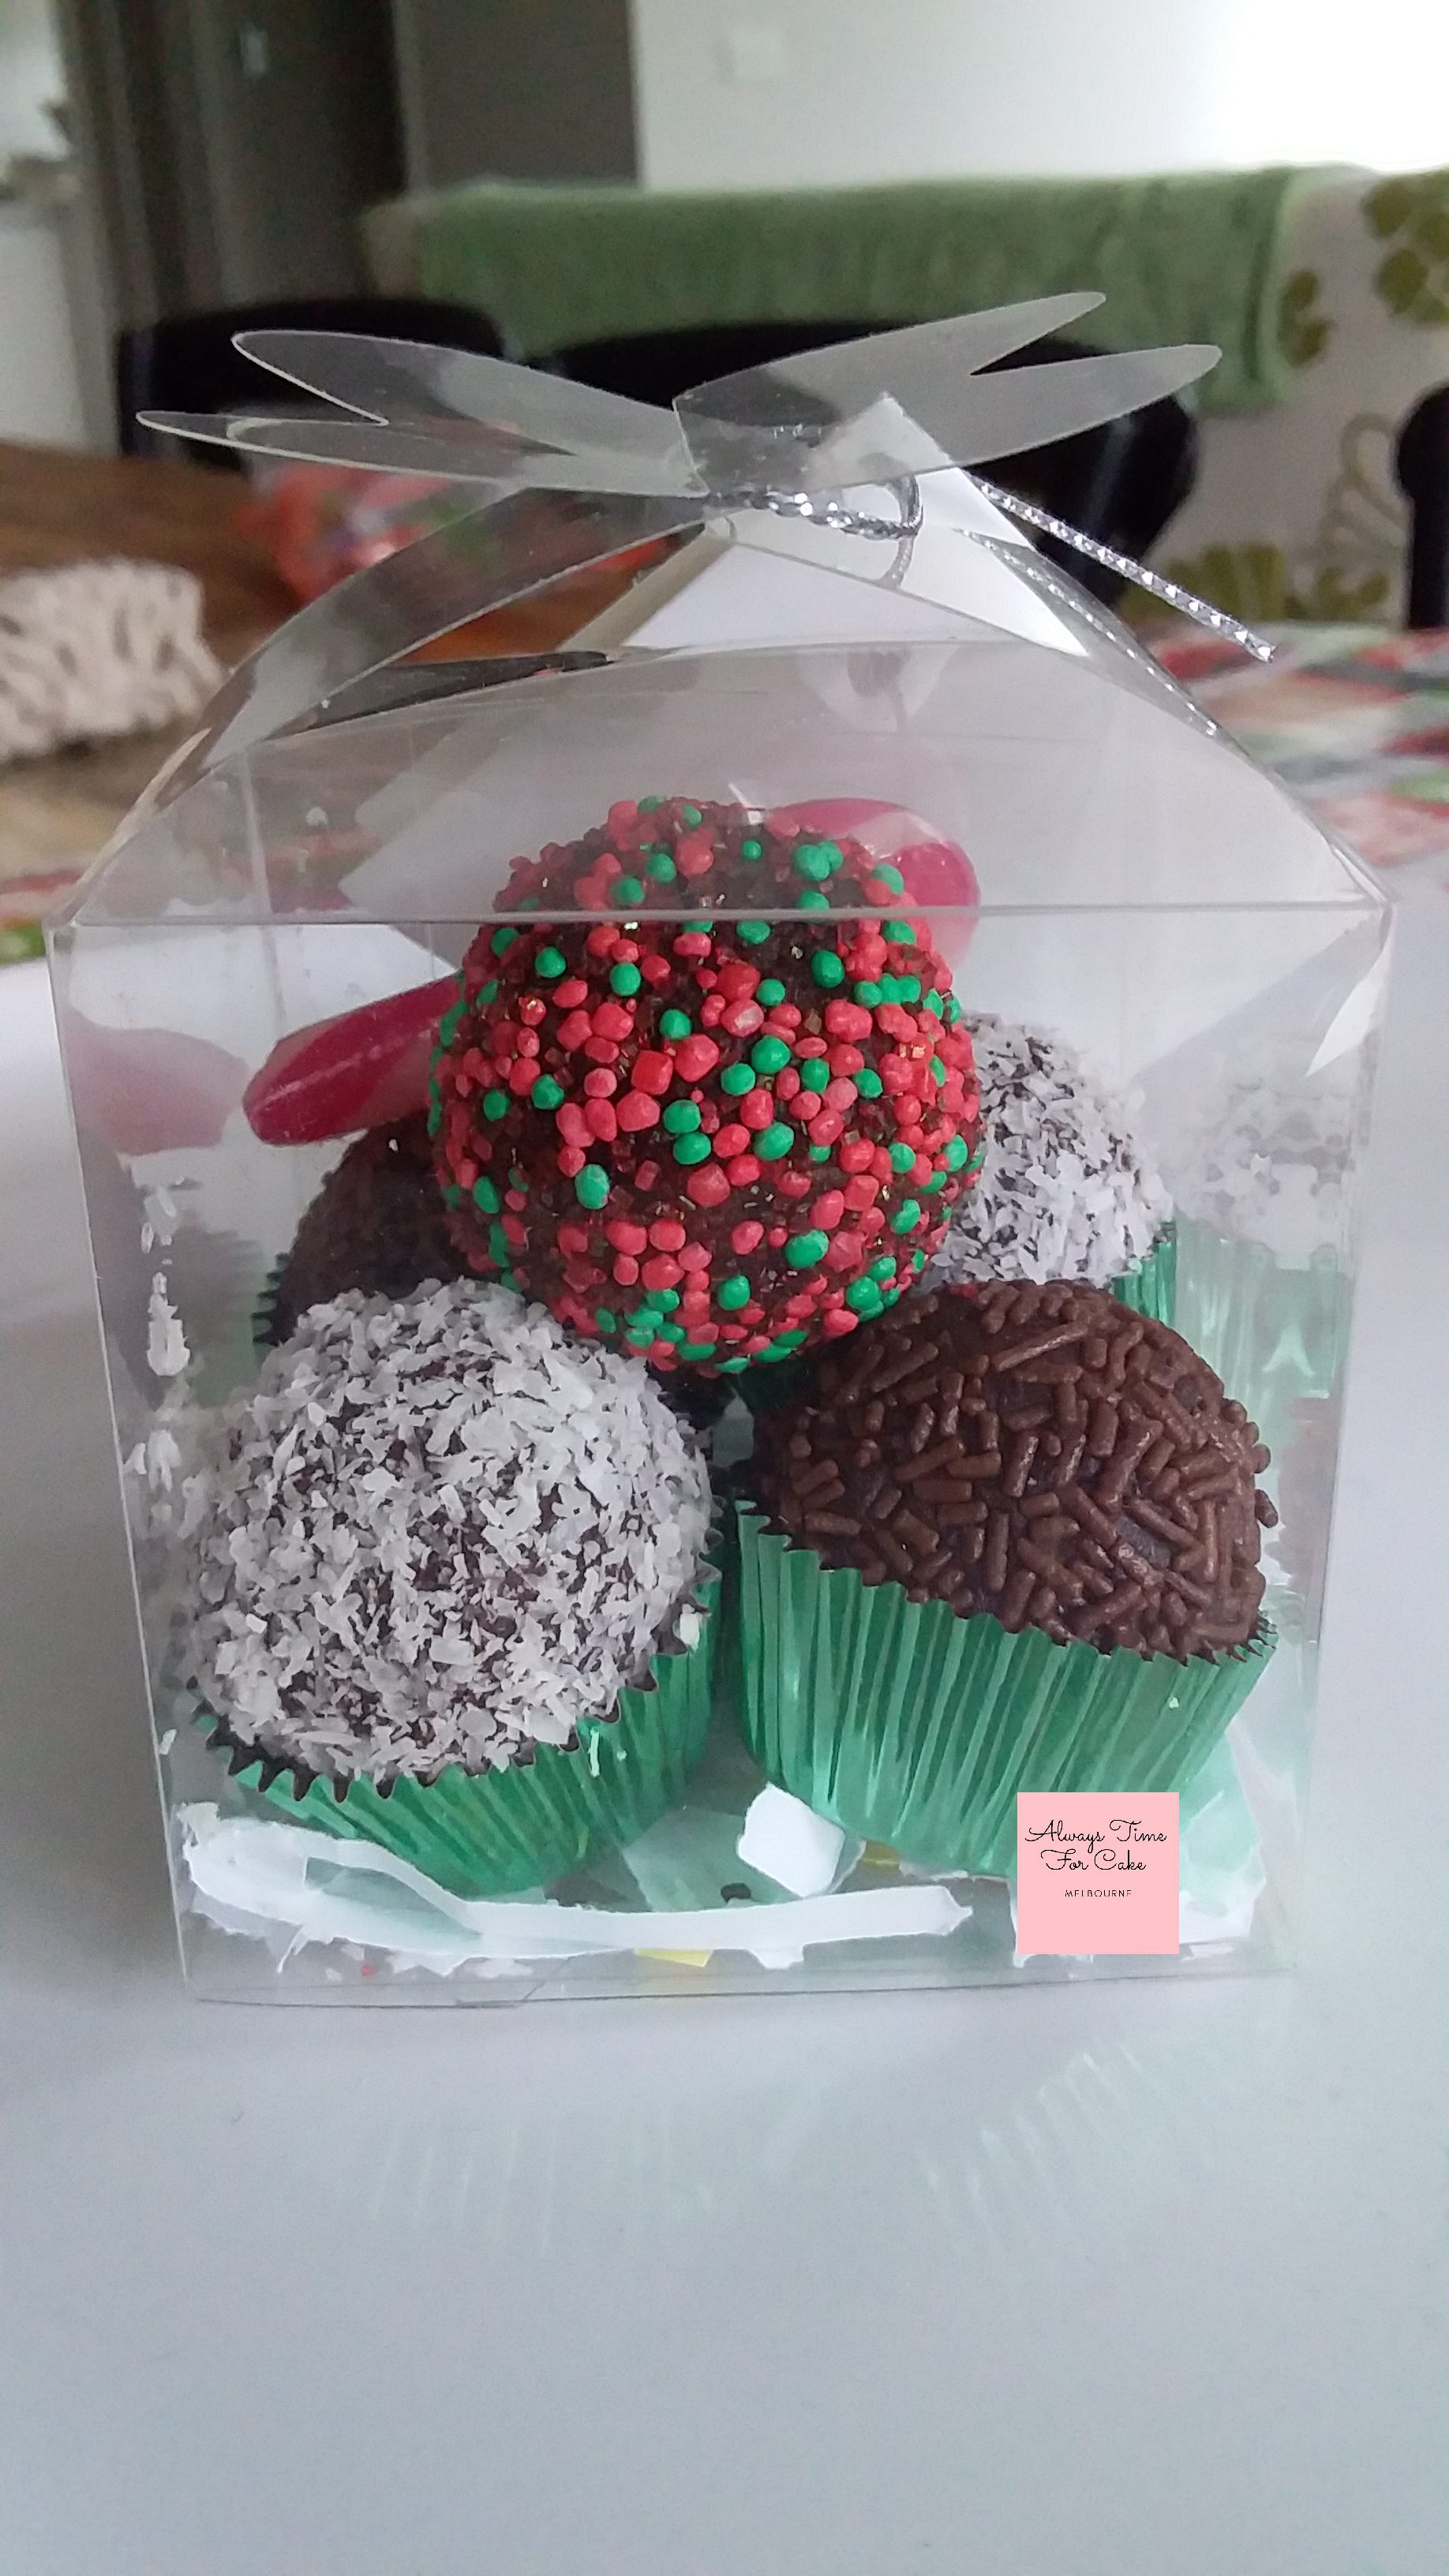 Truffles Chocolate Rum Infused Coconut Chocolate Sprinkles Gifts Desserts